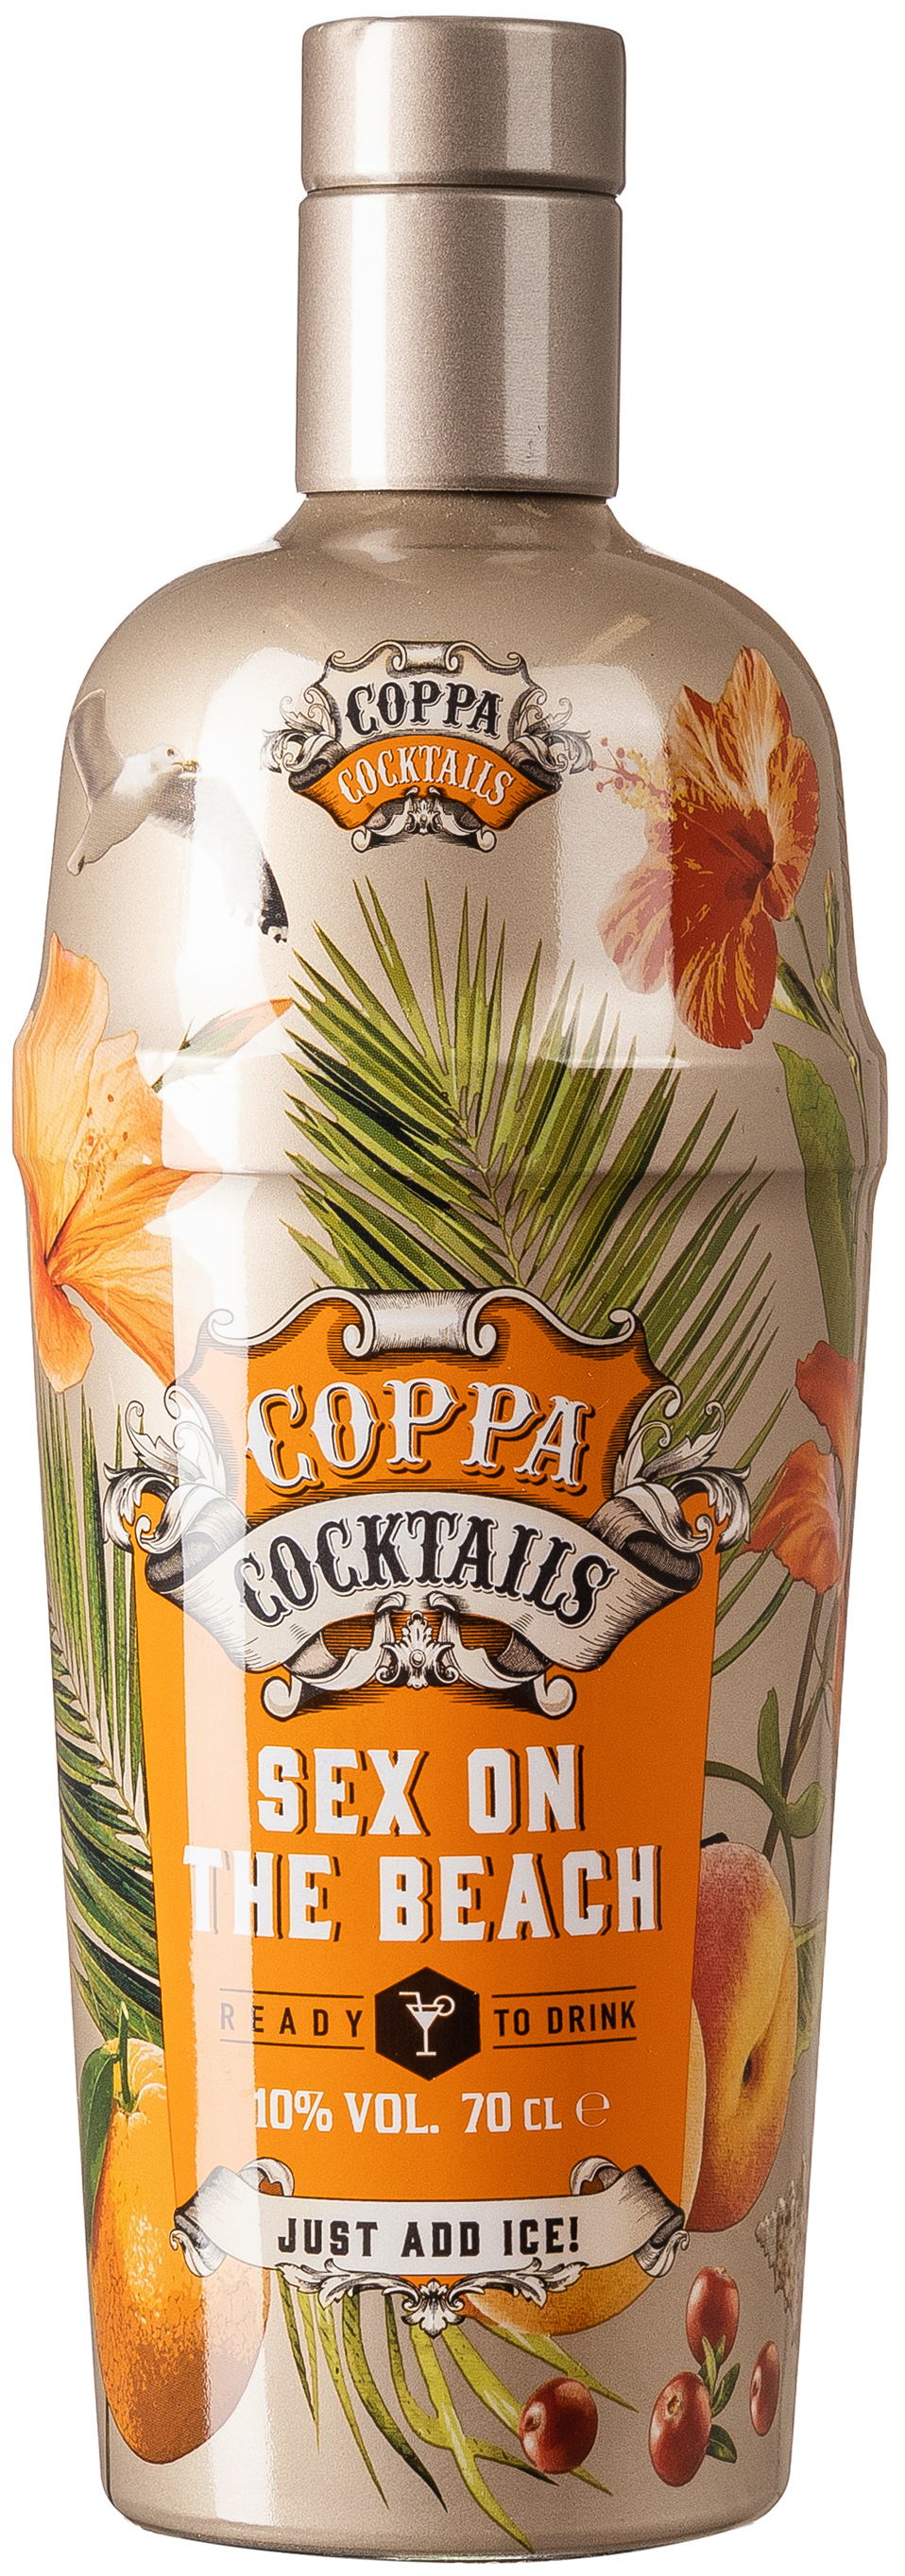 Coppa Cocktails Sex on The Beach 10% vol. 0,7 L